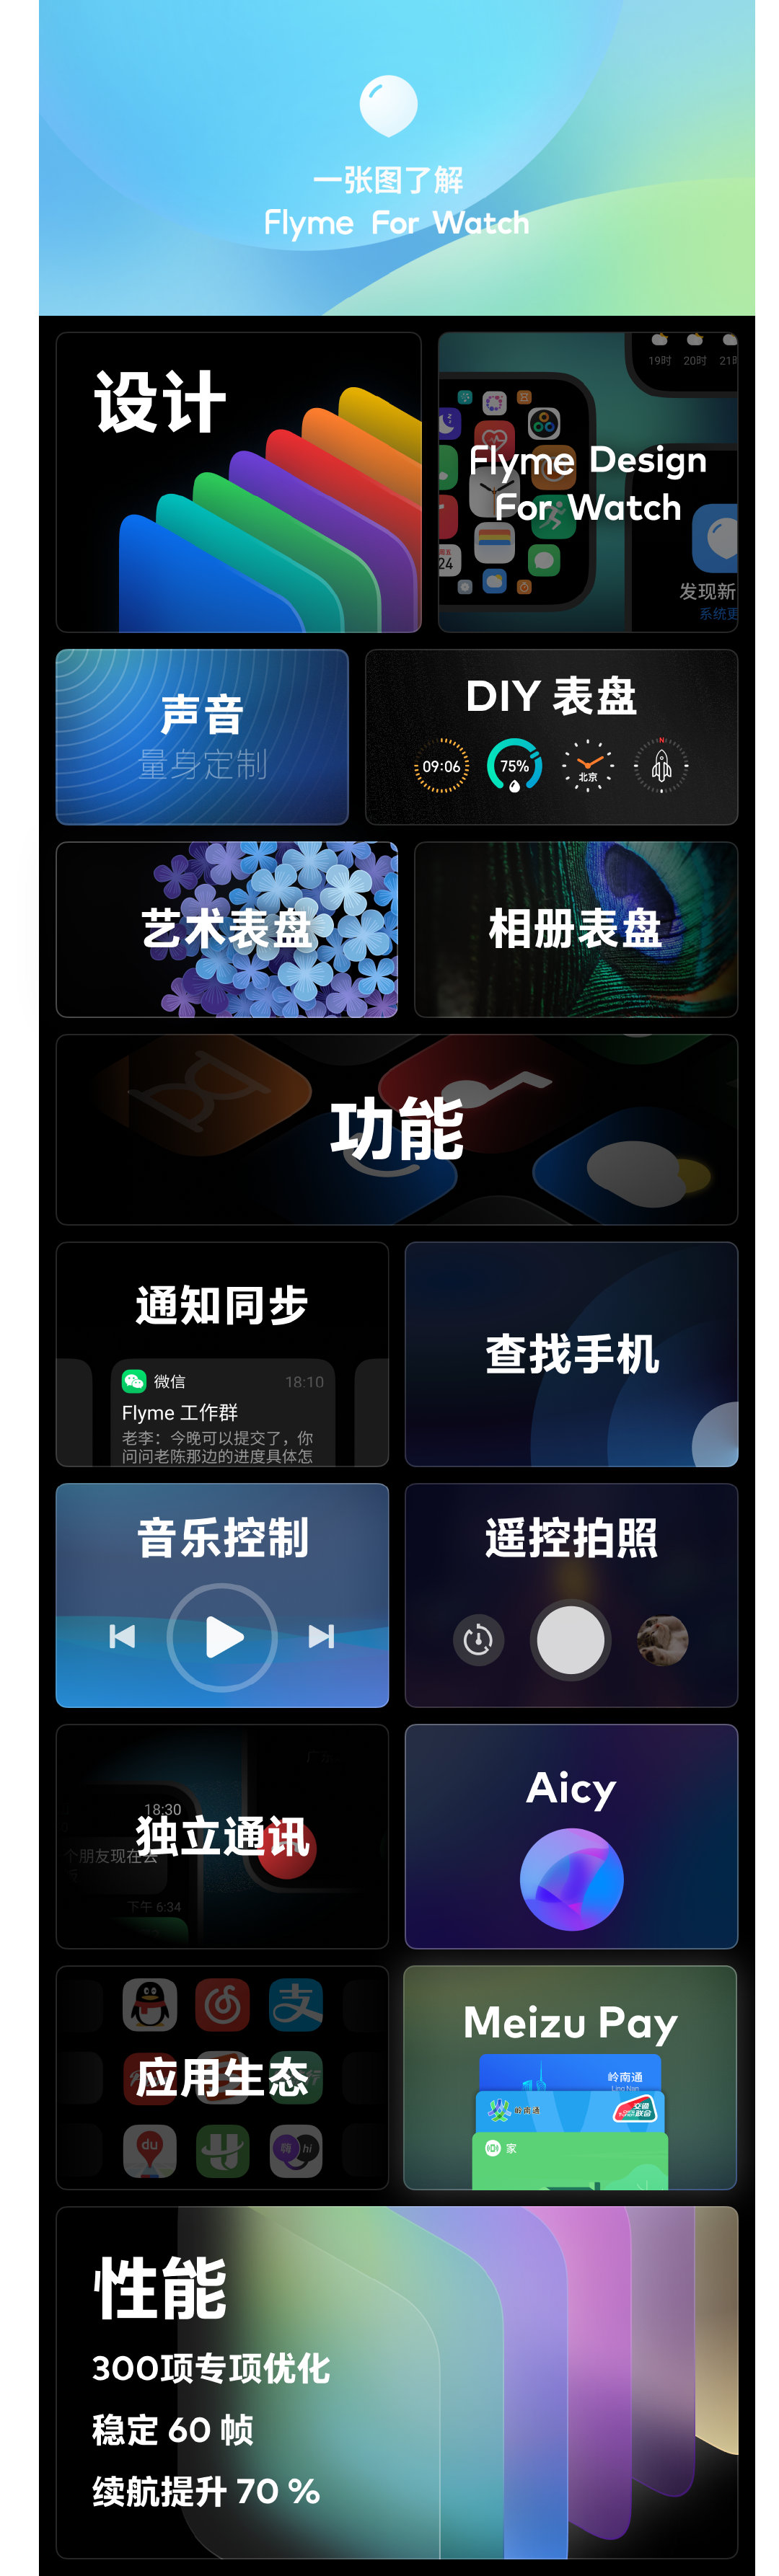 One More Thing：Flyme for Watch，智能手表五月发布